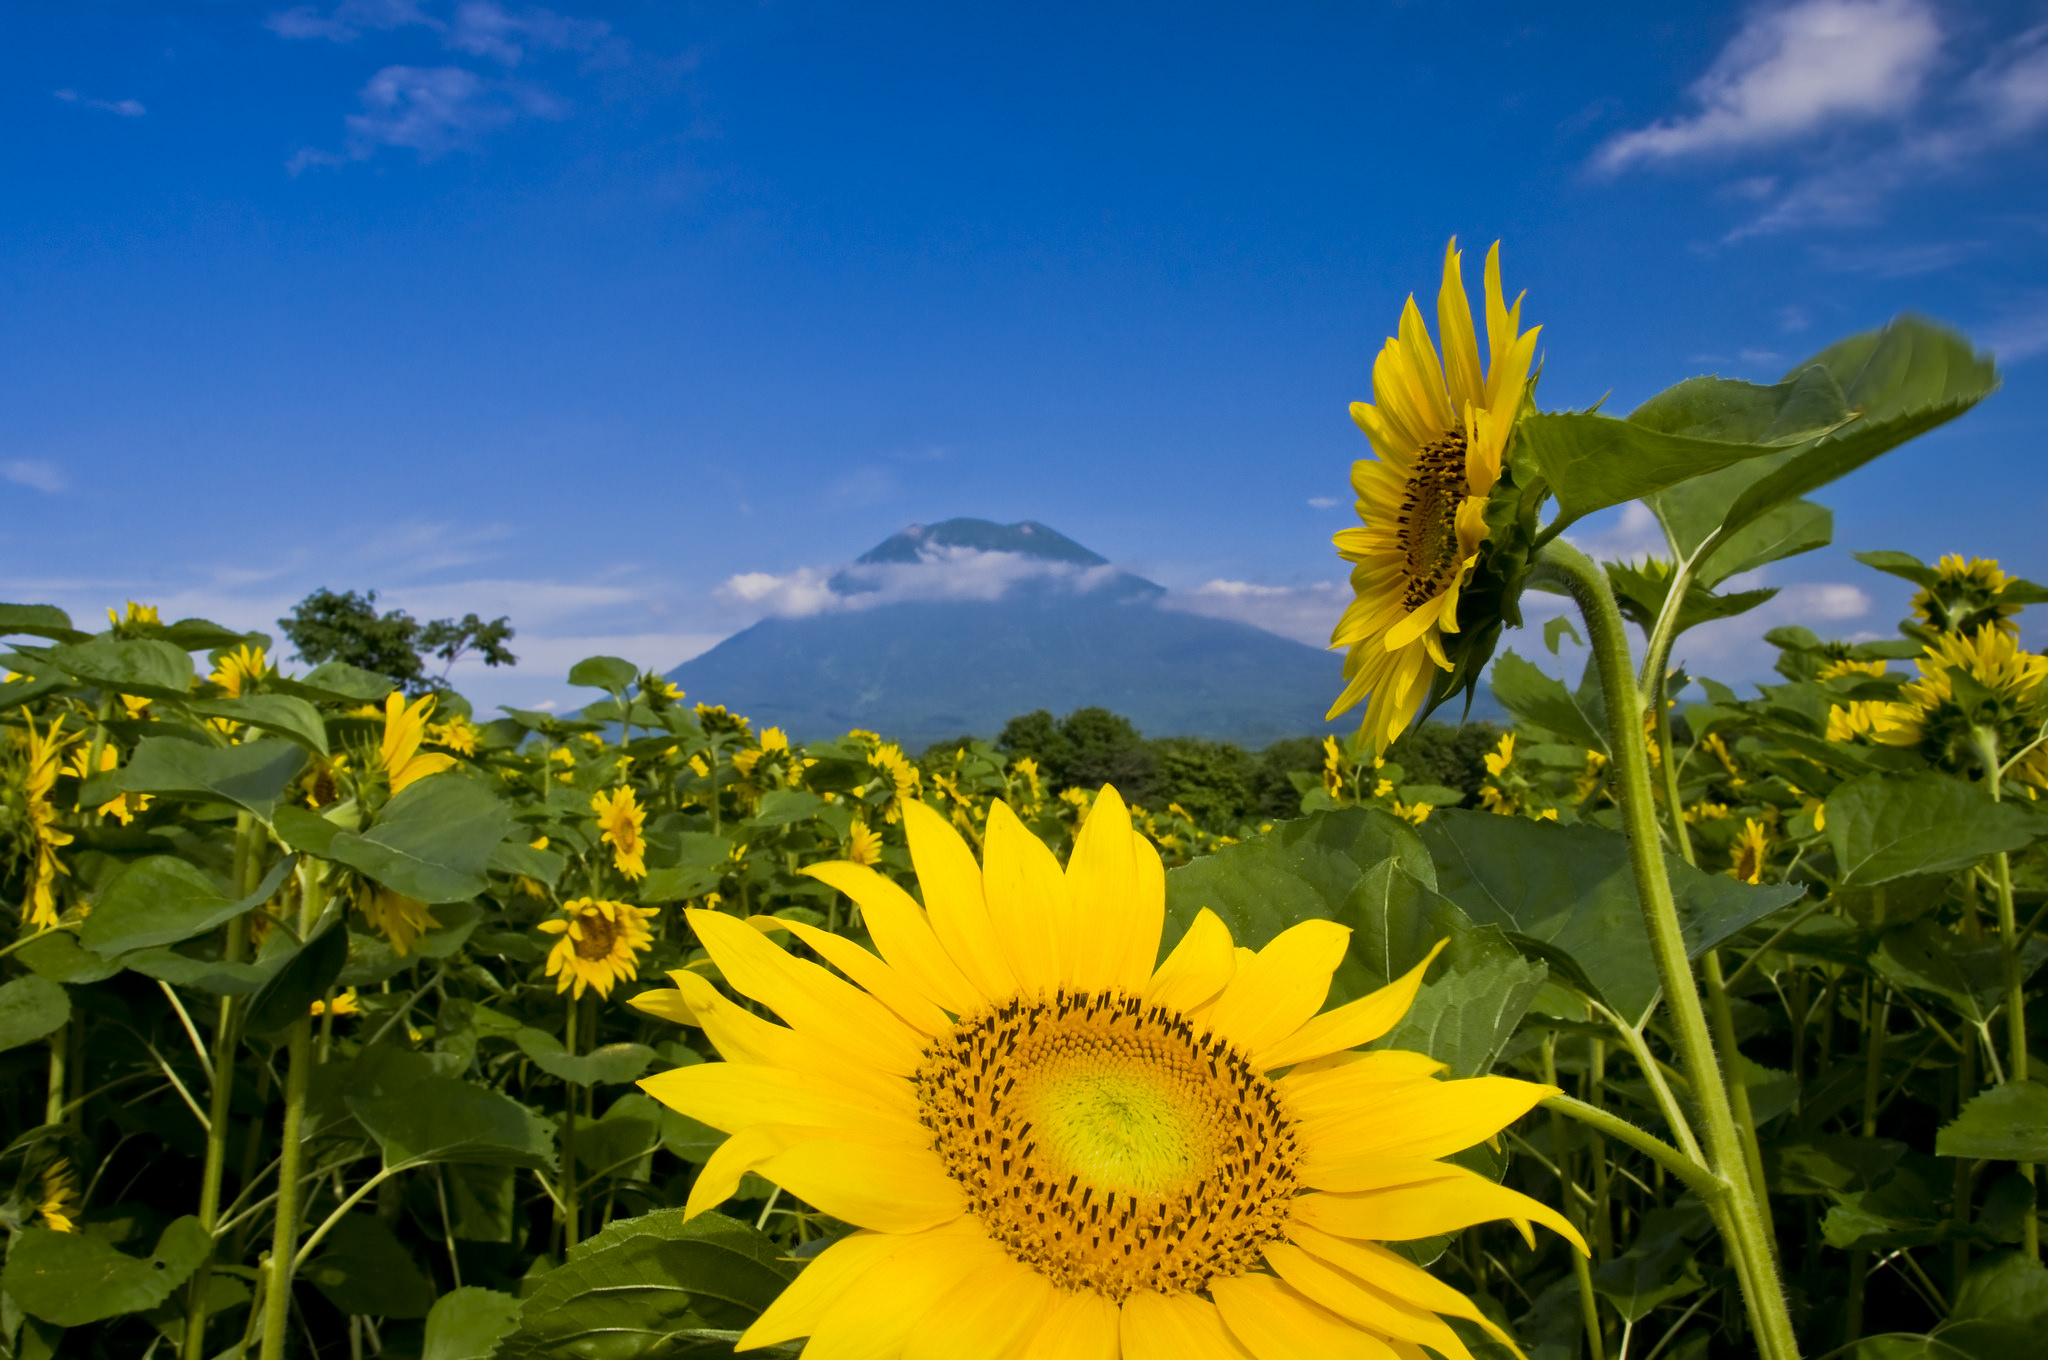 yotei behind a field of sunflowers